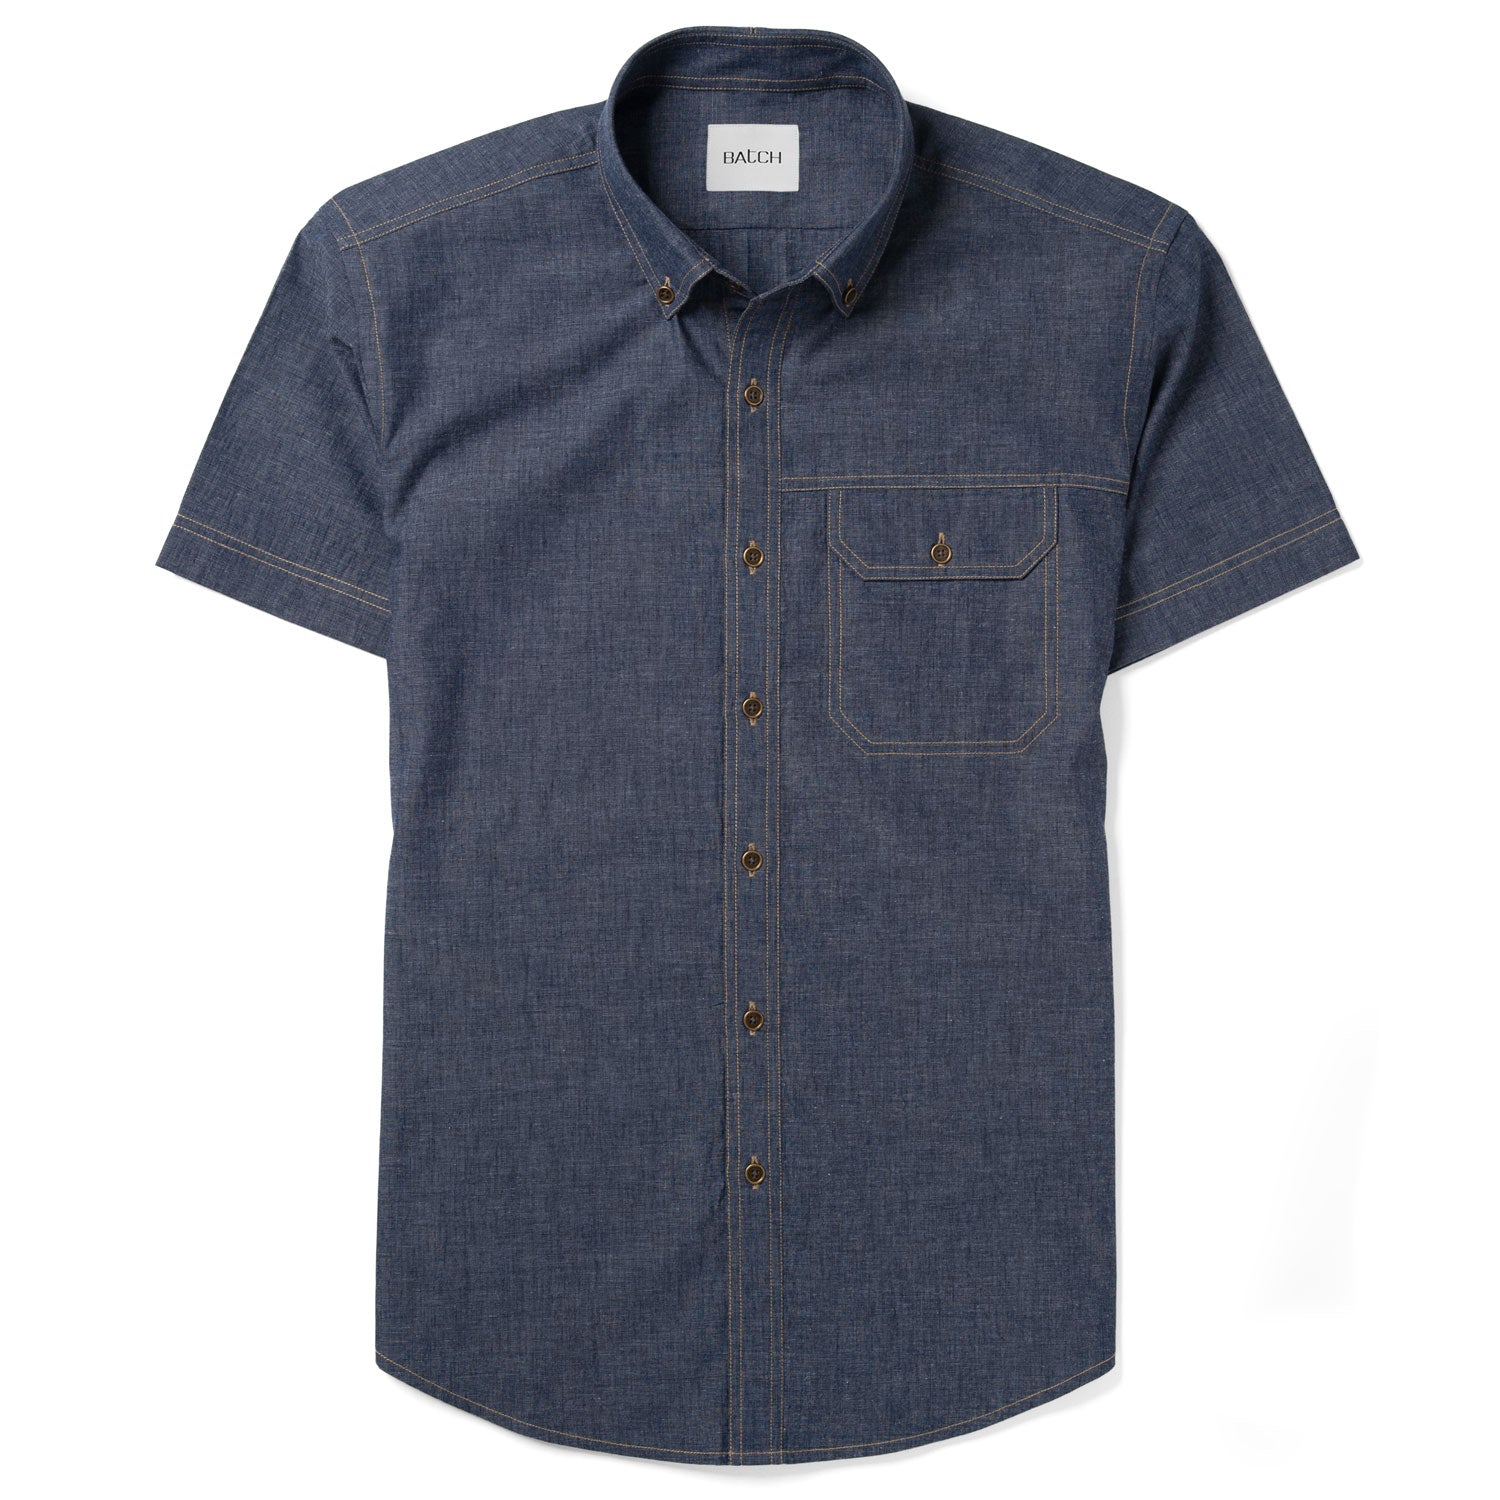 Builder Short Sleeve Casual Shirt – Navy Cotton End-on-end